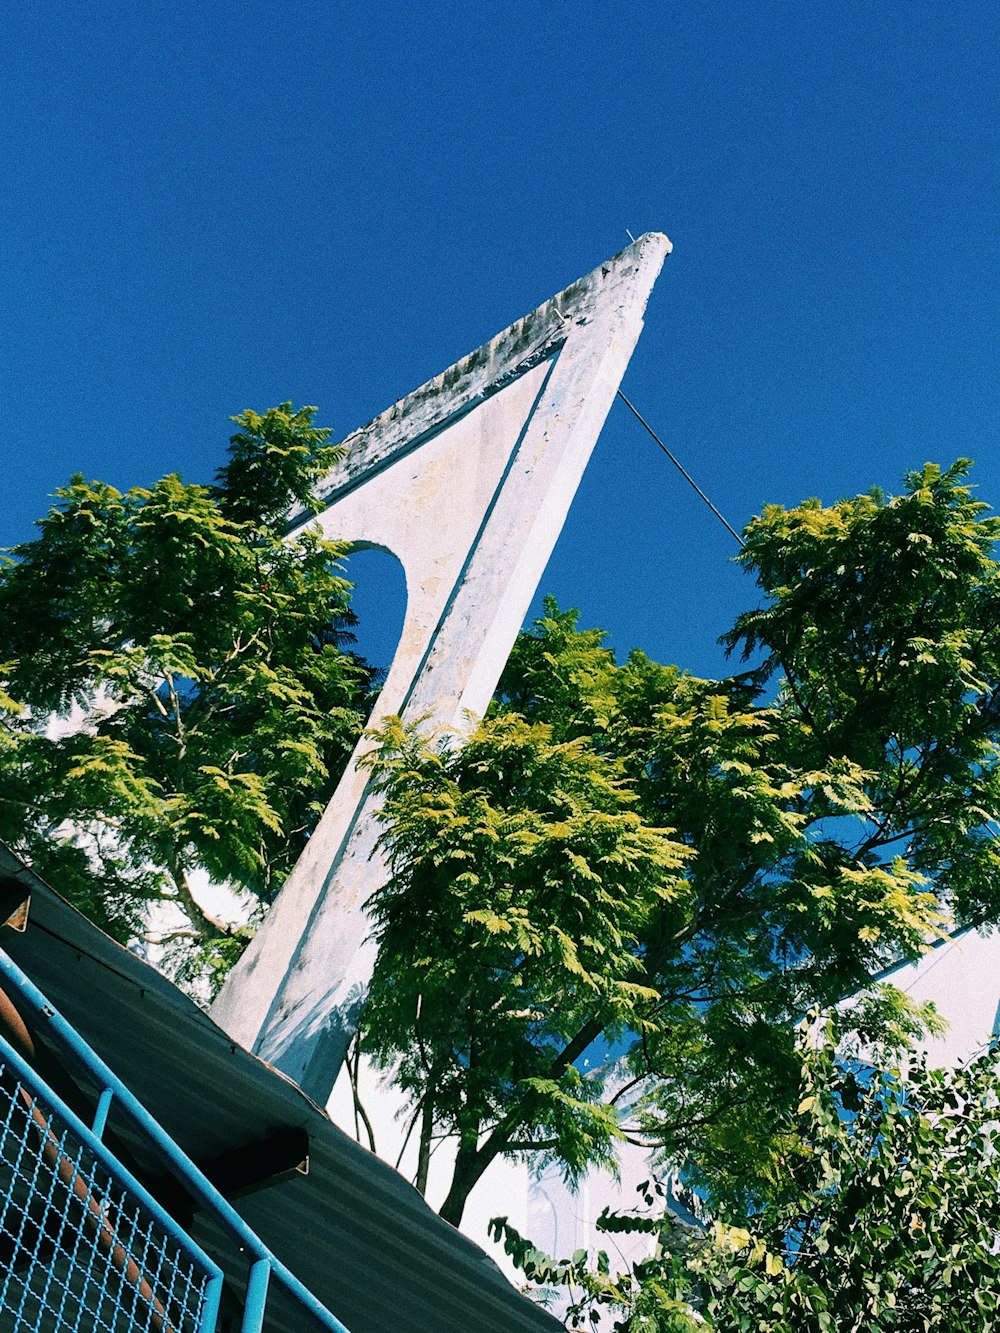 a tall white monument sitting next to a lush green tree